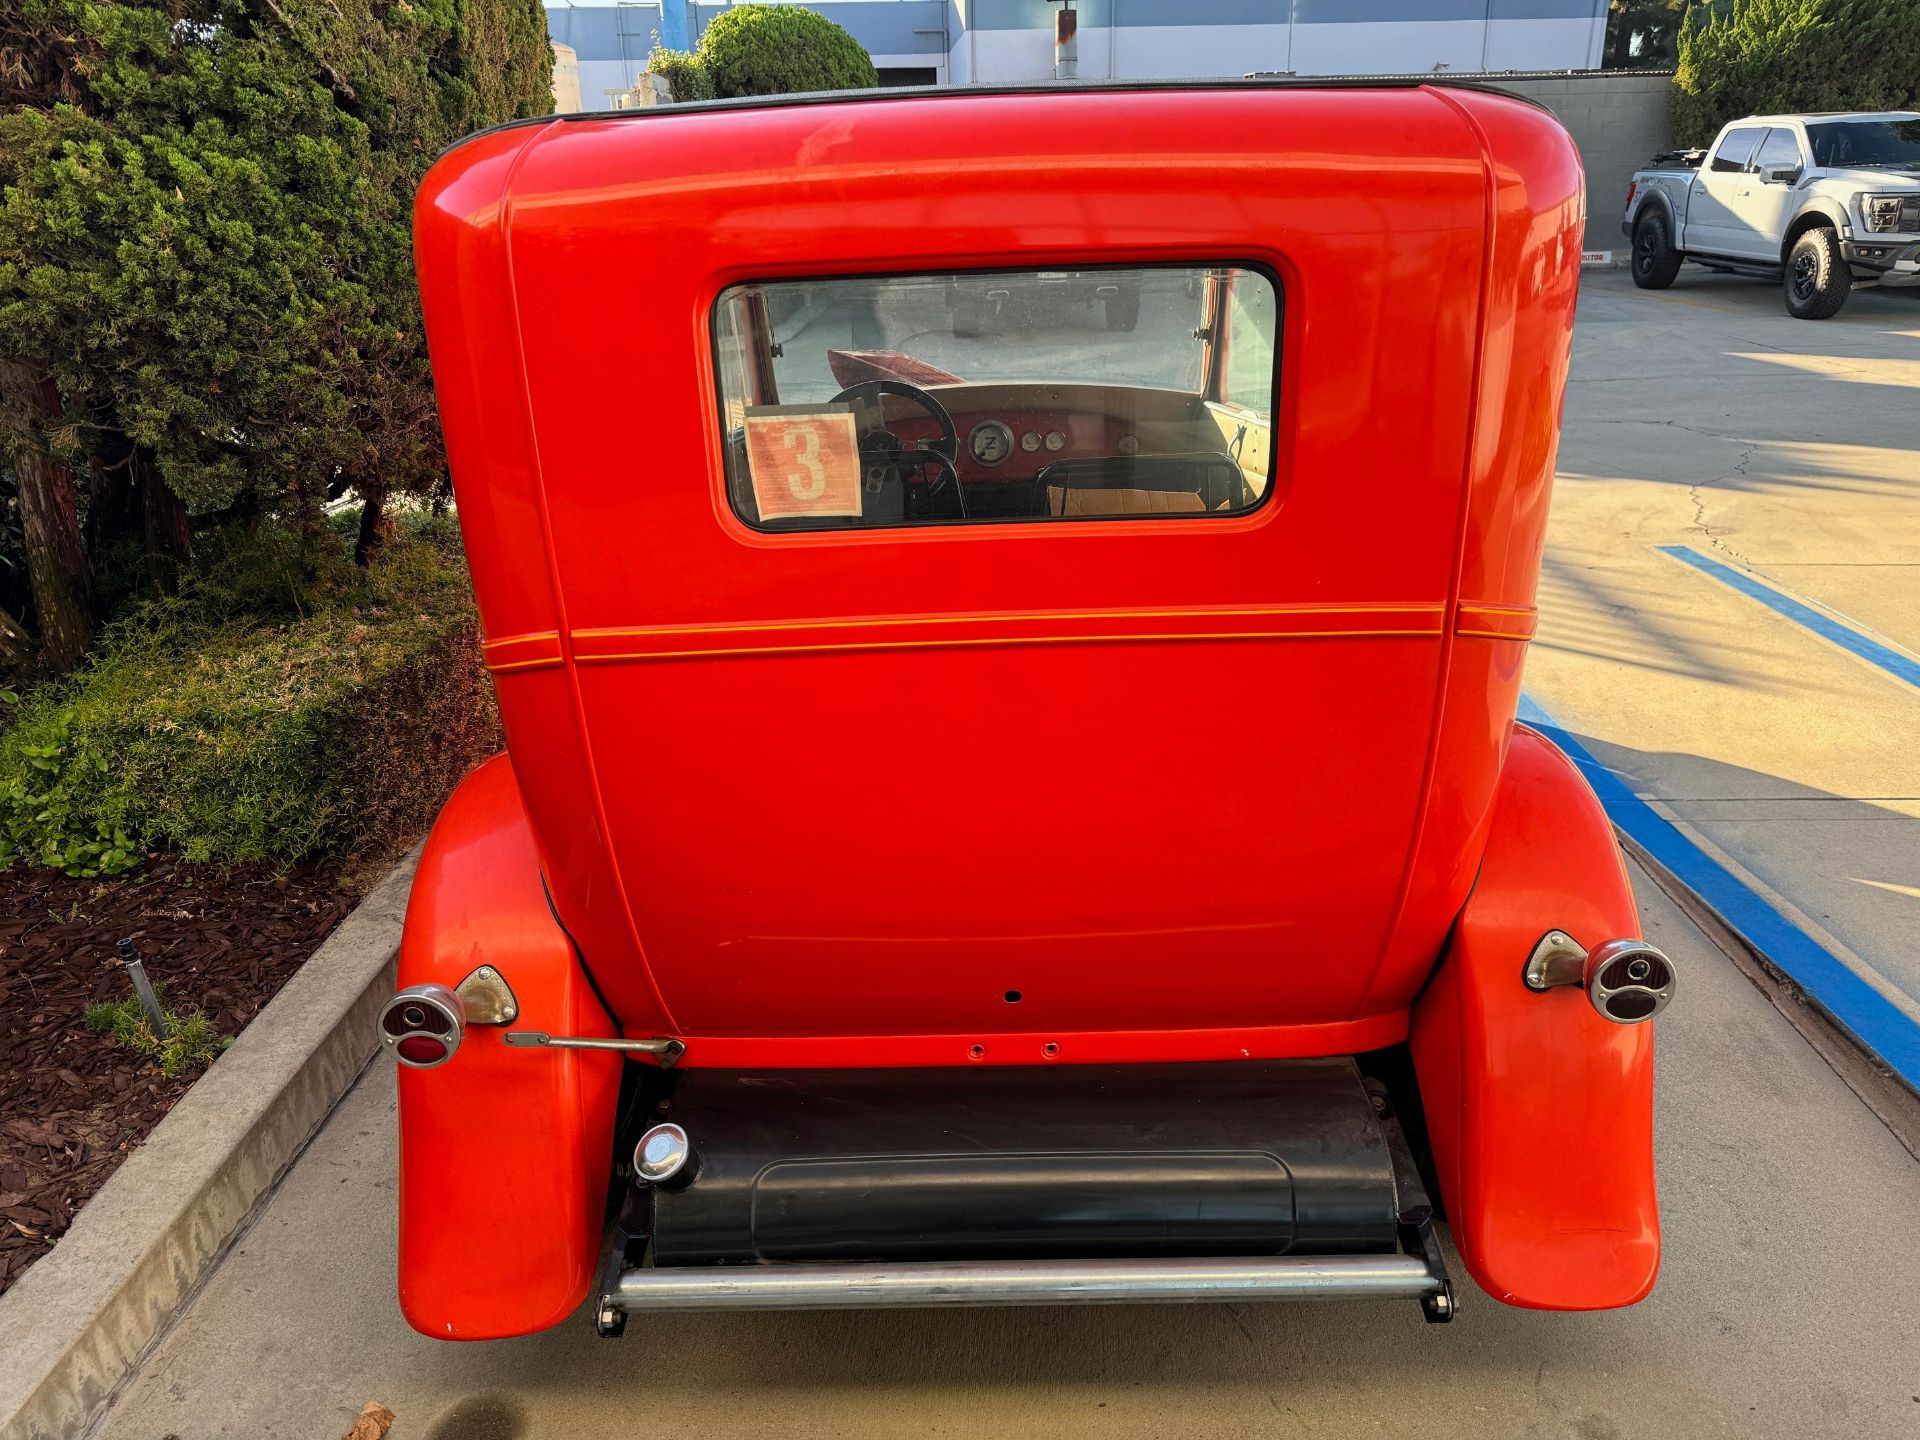 1928 FORD HOT ROD COUPE, (LOCATION: SANTA FE SPRINGS, CA) - Image 6 of 11